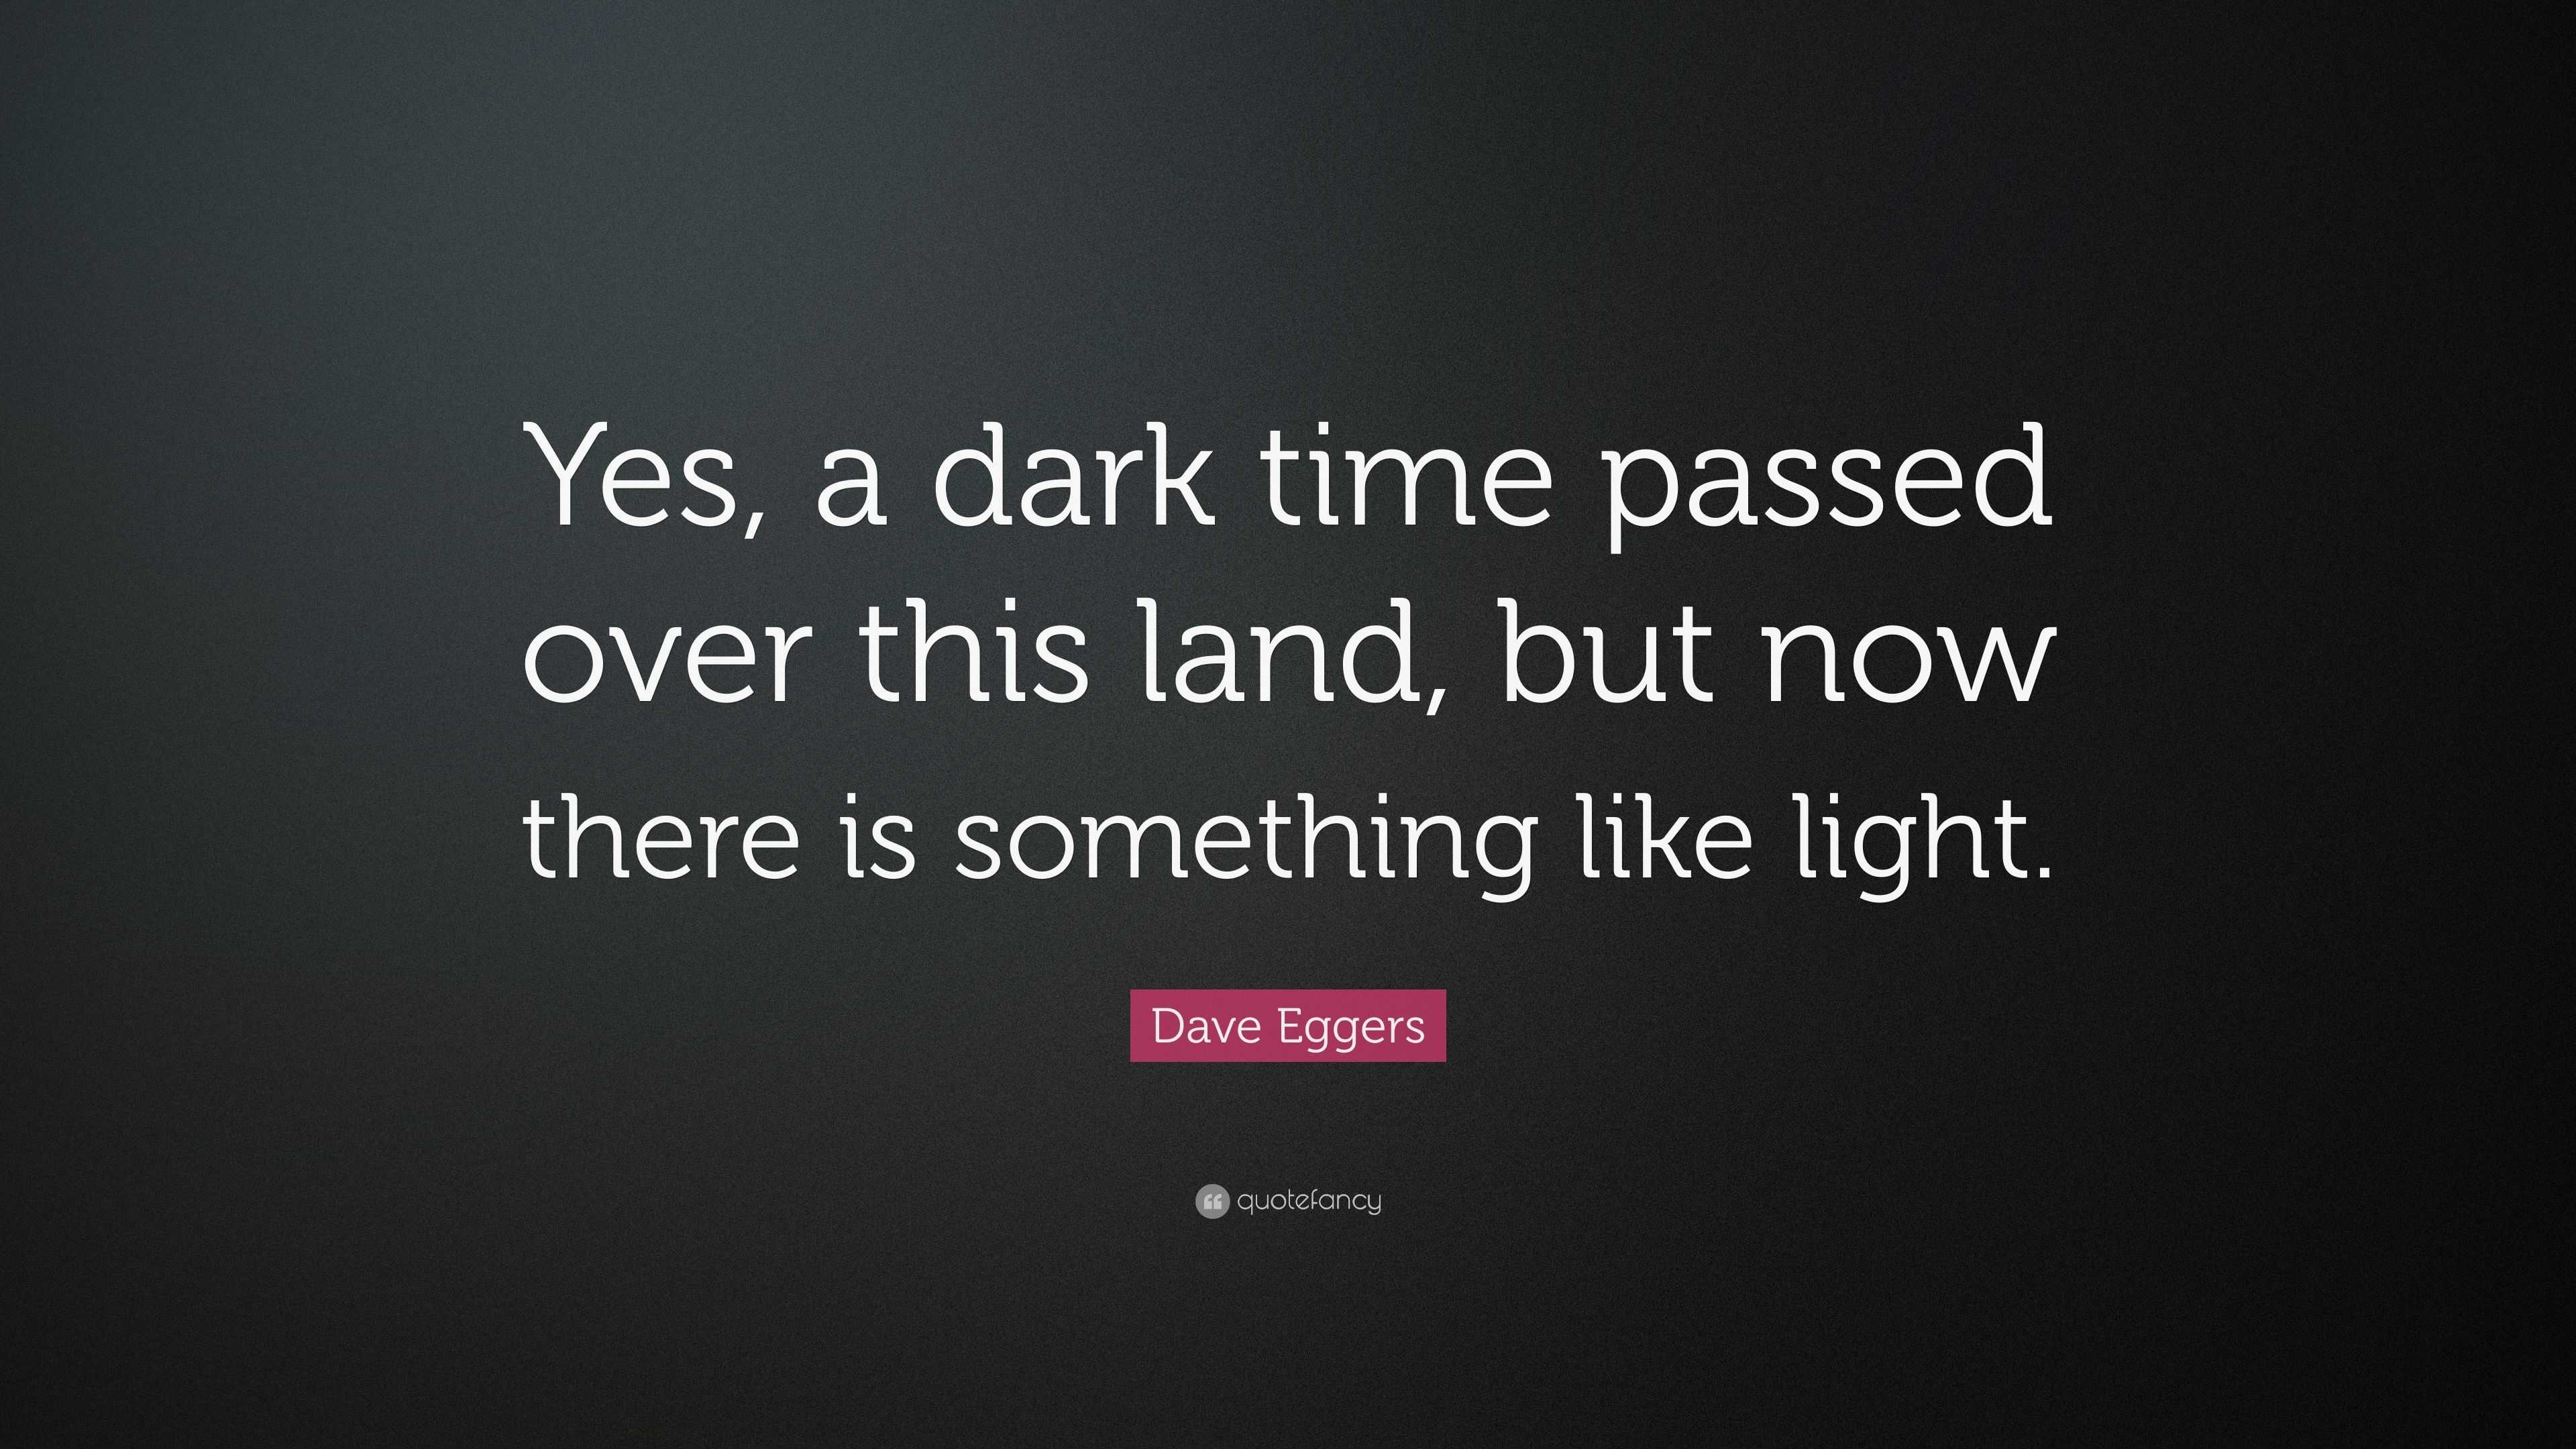 Dave Eggers Quote: “Yes, a dark time passed over this but now there is something